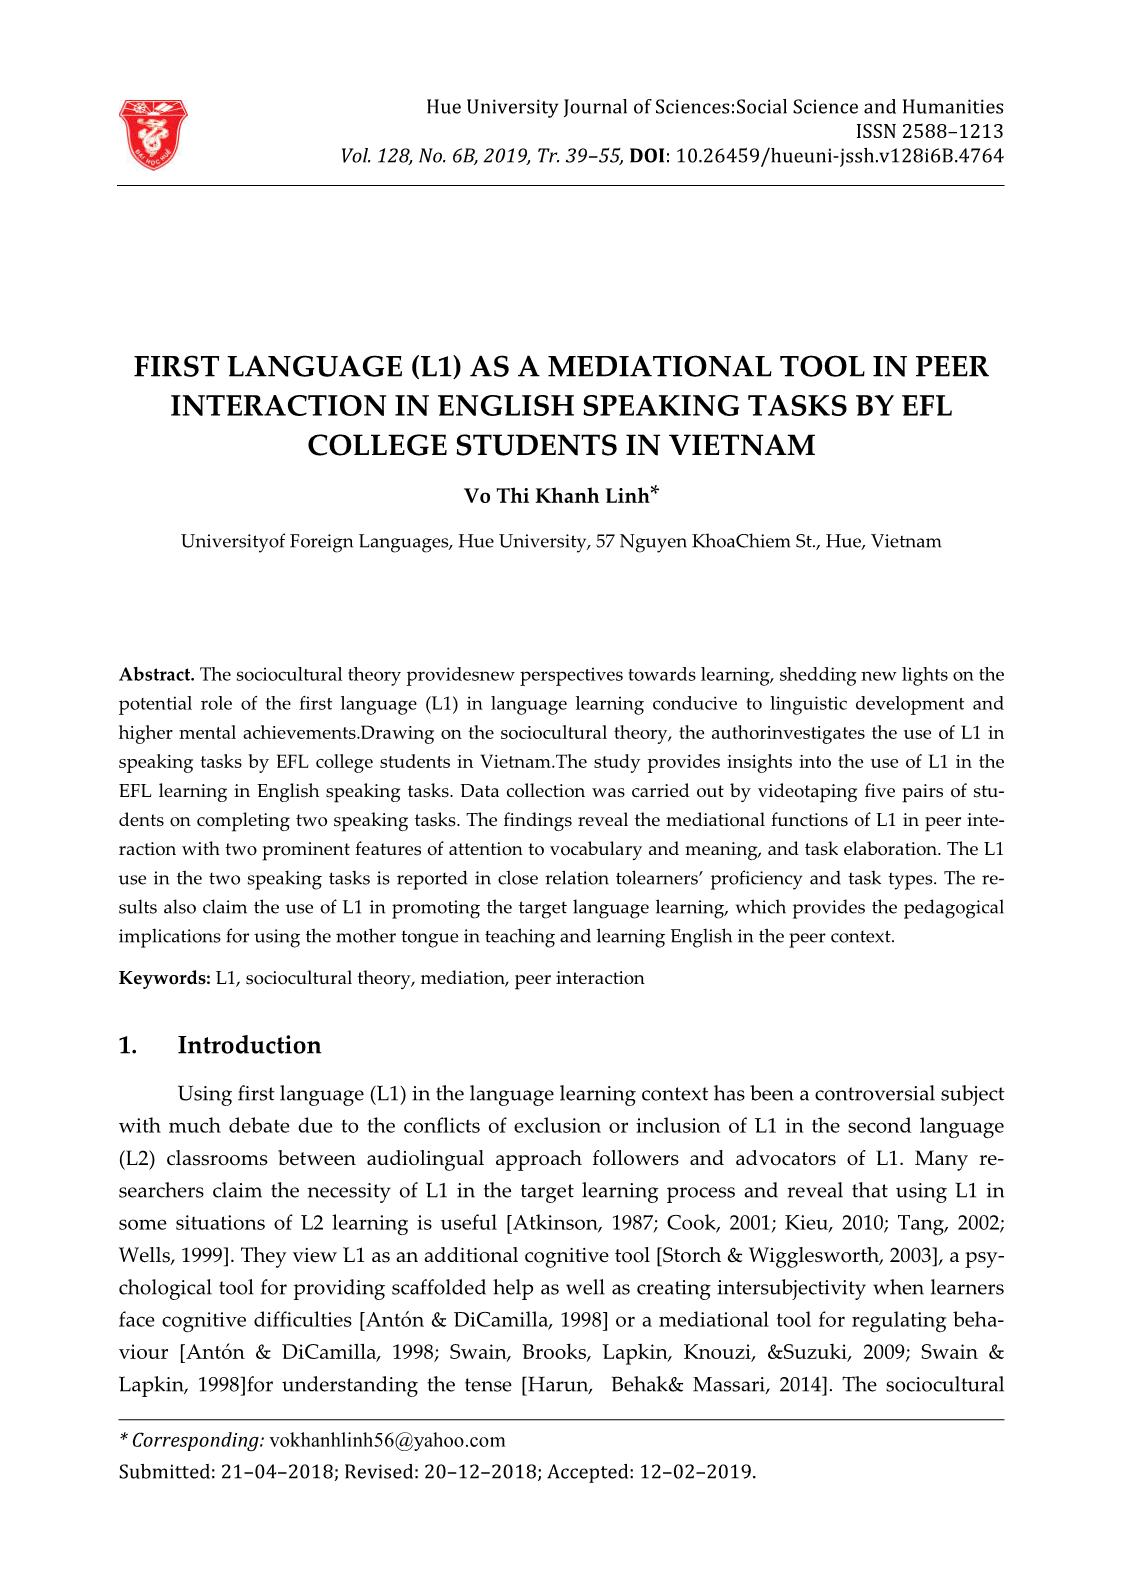 First language (L1) as a mediational tool in peer interaction in English speaking tasks by EFL college students in Vietnam trang 1